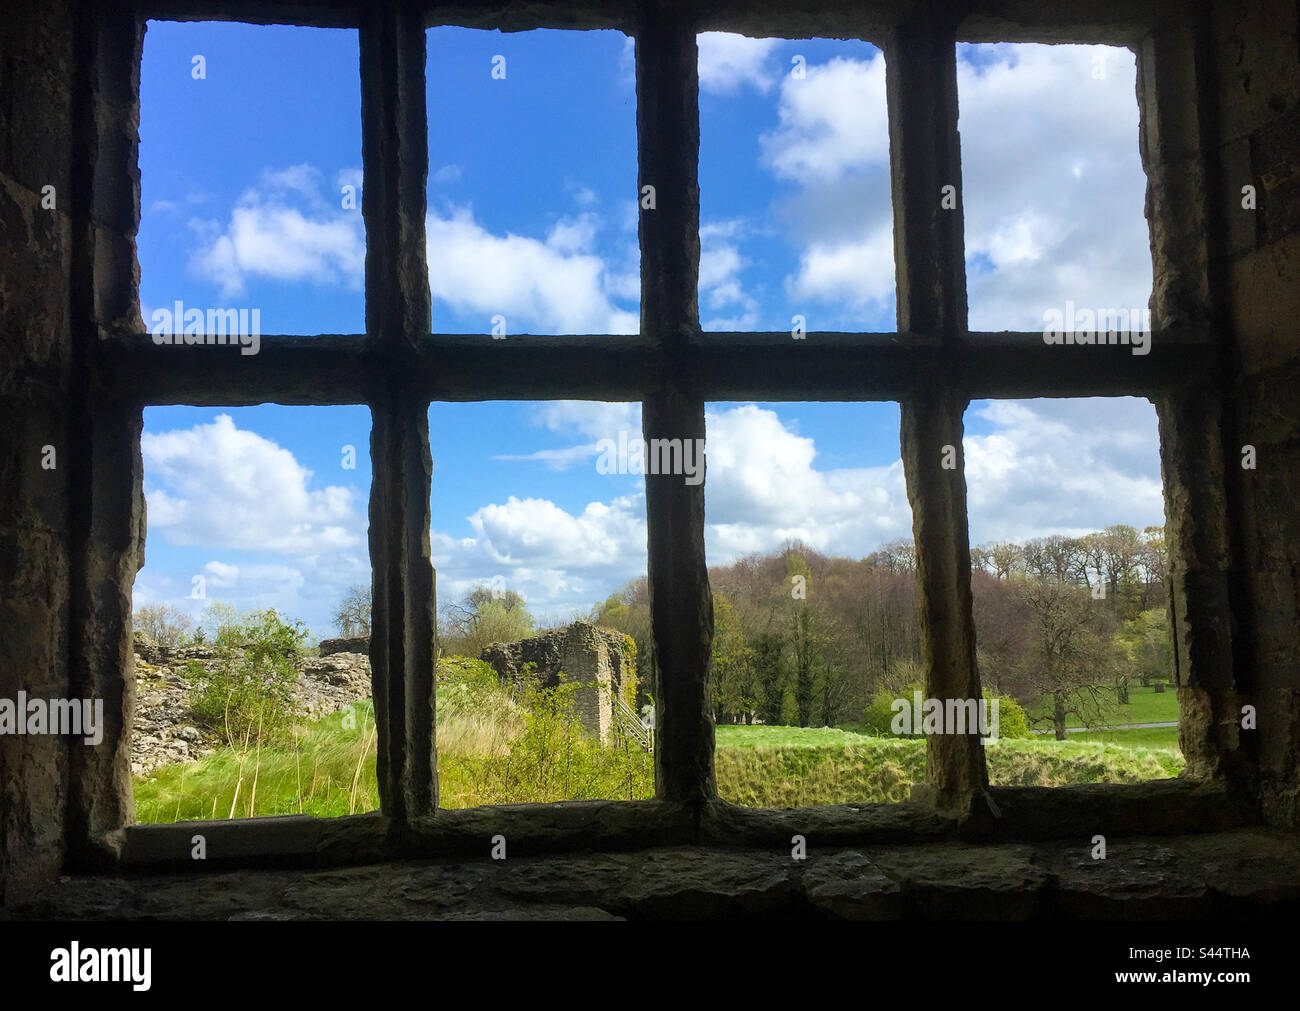 Looking out a window in a ruined building, out across an English country landscape. Stock Photo